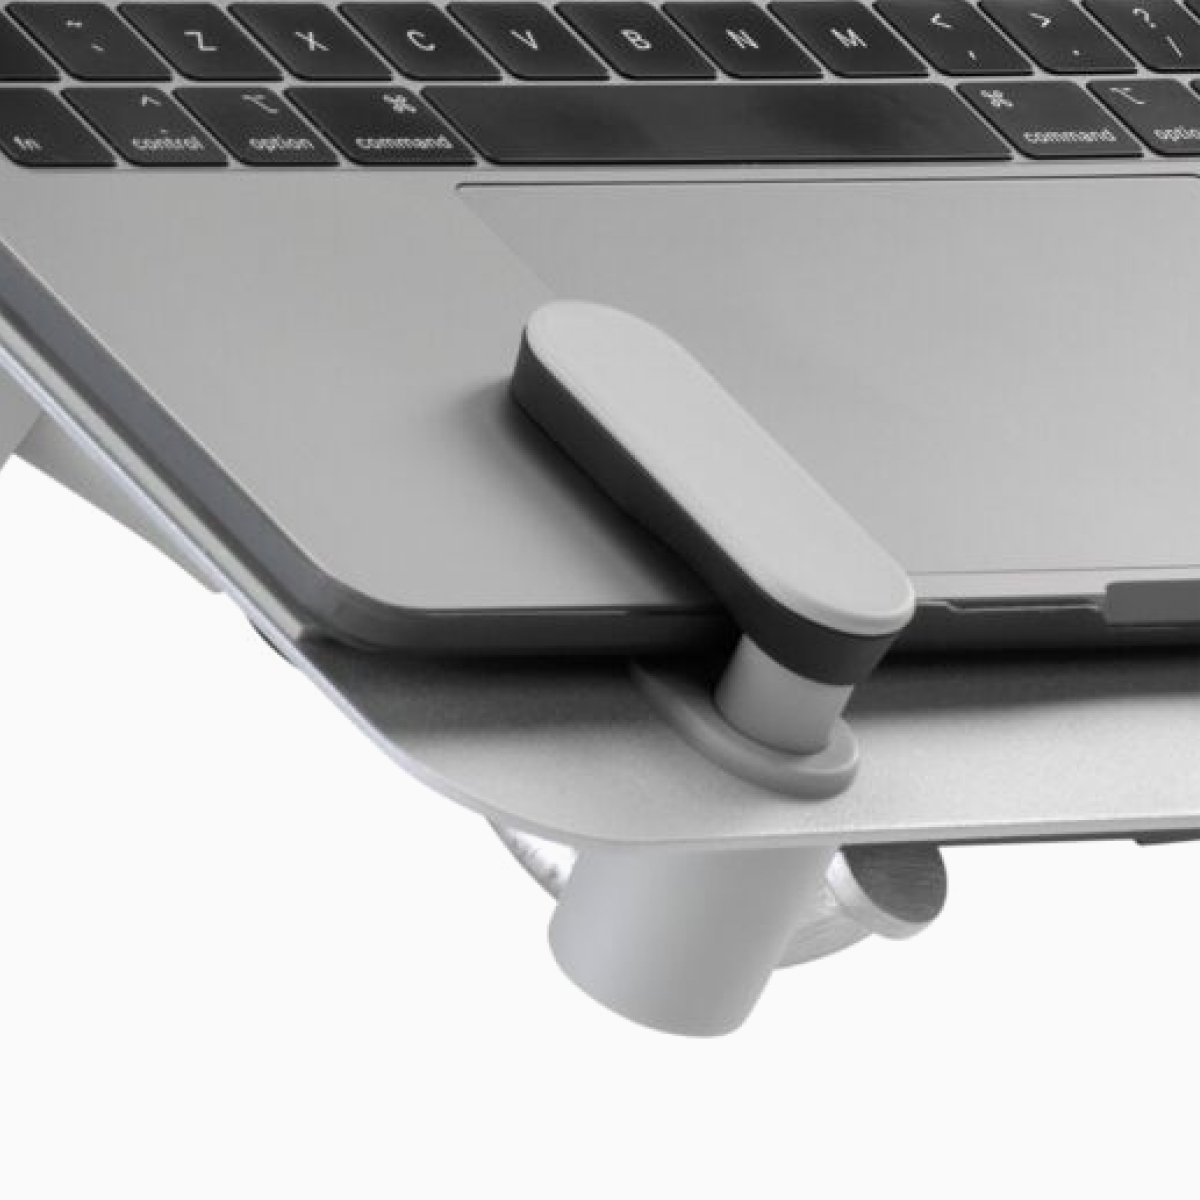 A close-up view showing a front corner of an open laptop supported by an Ollin Laptop Mount